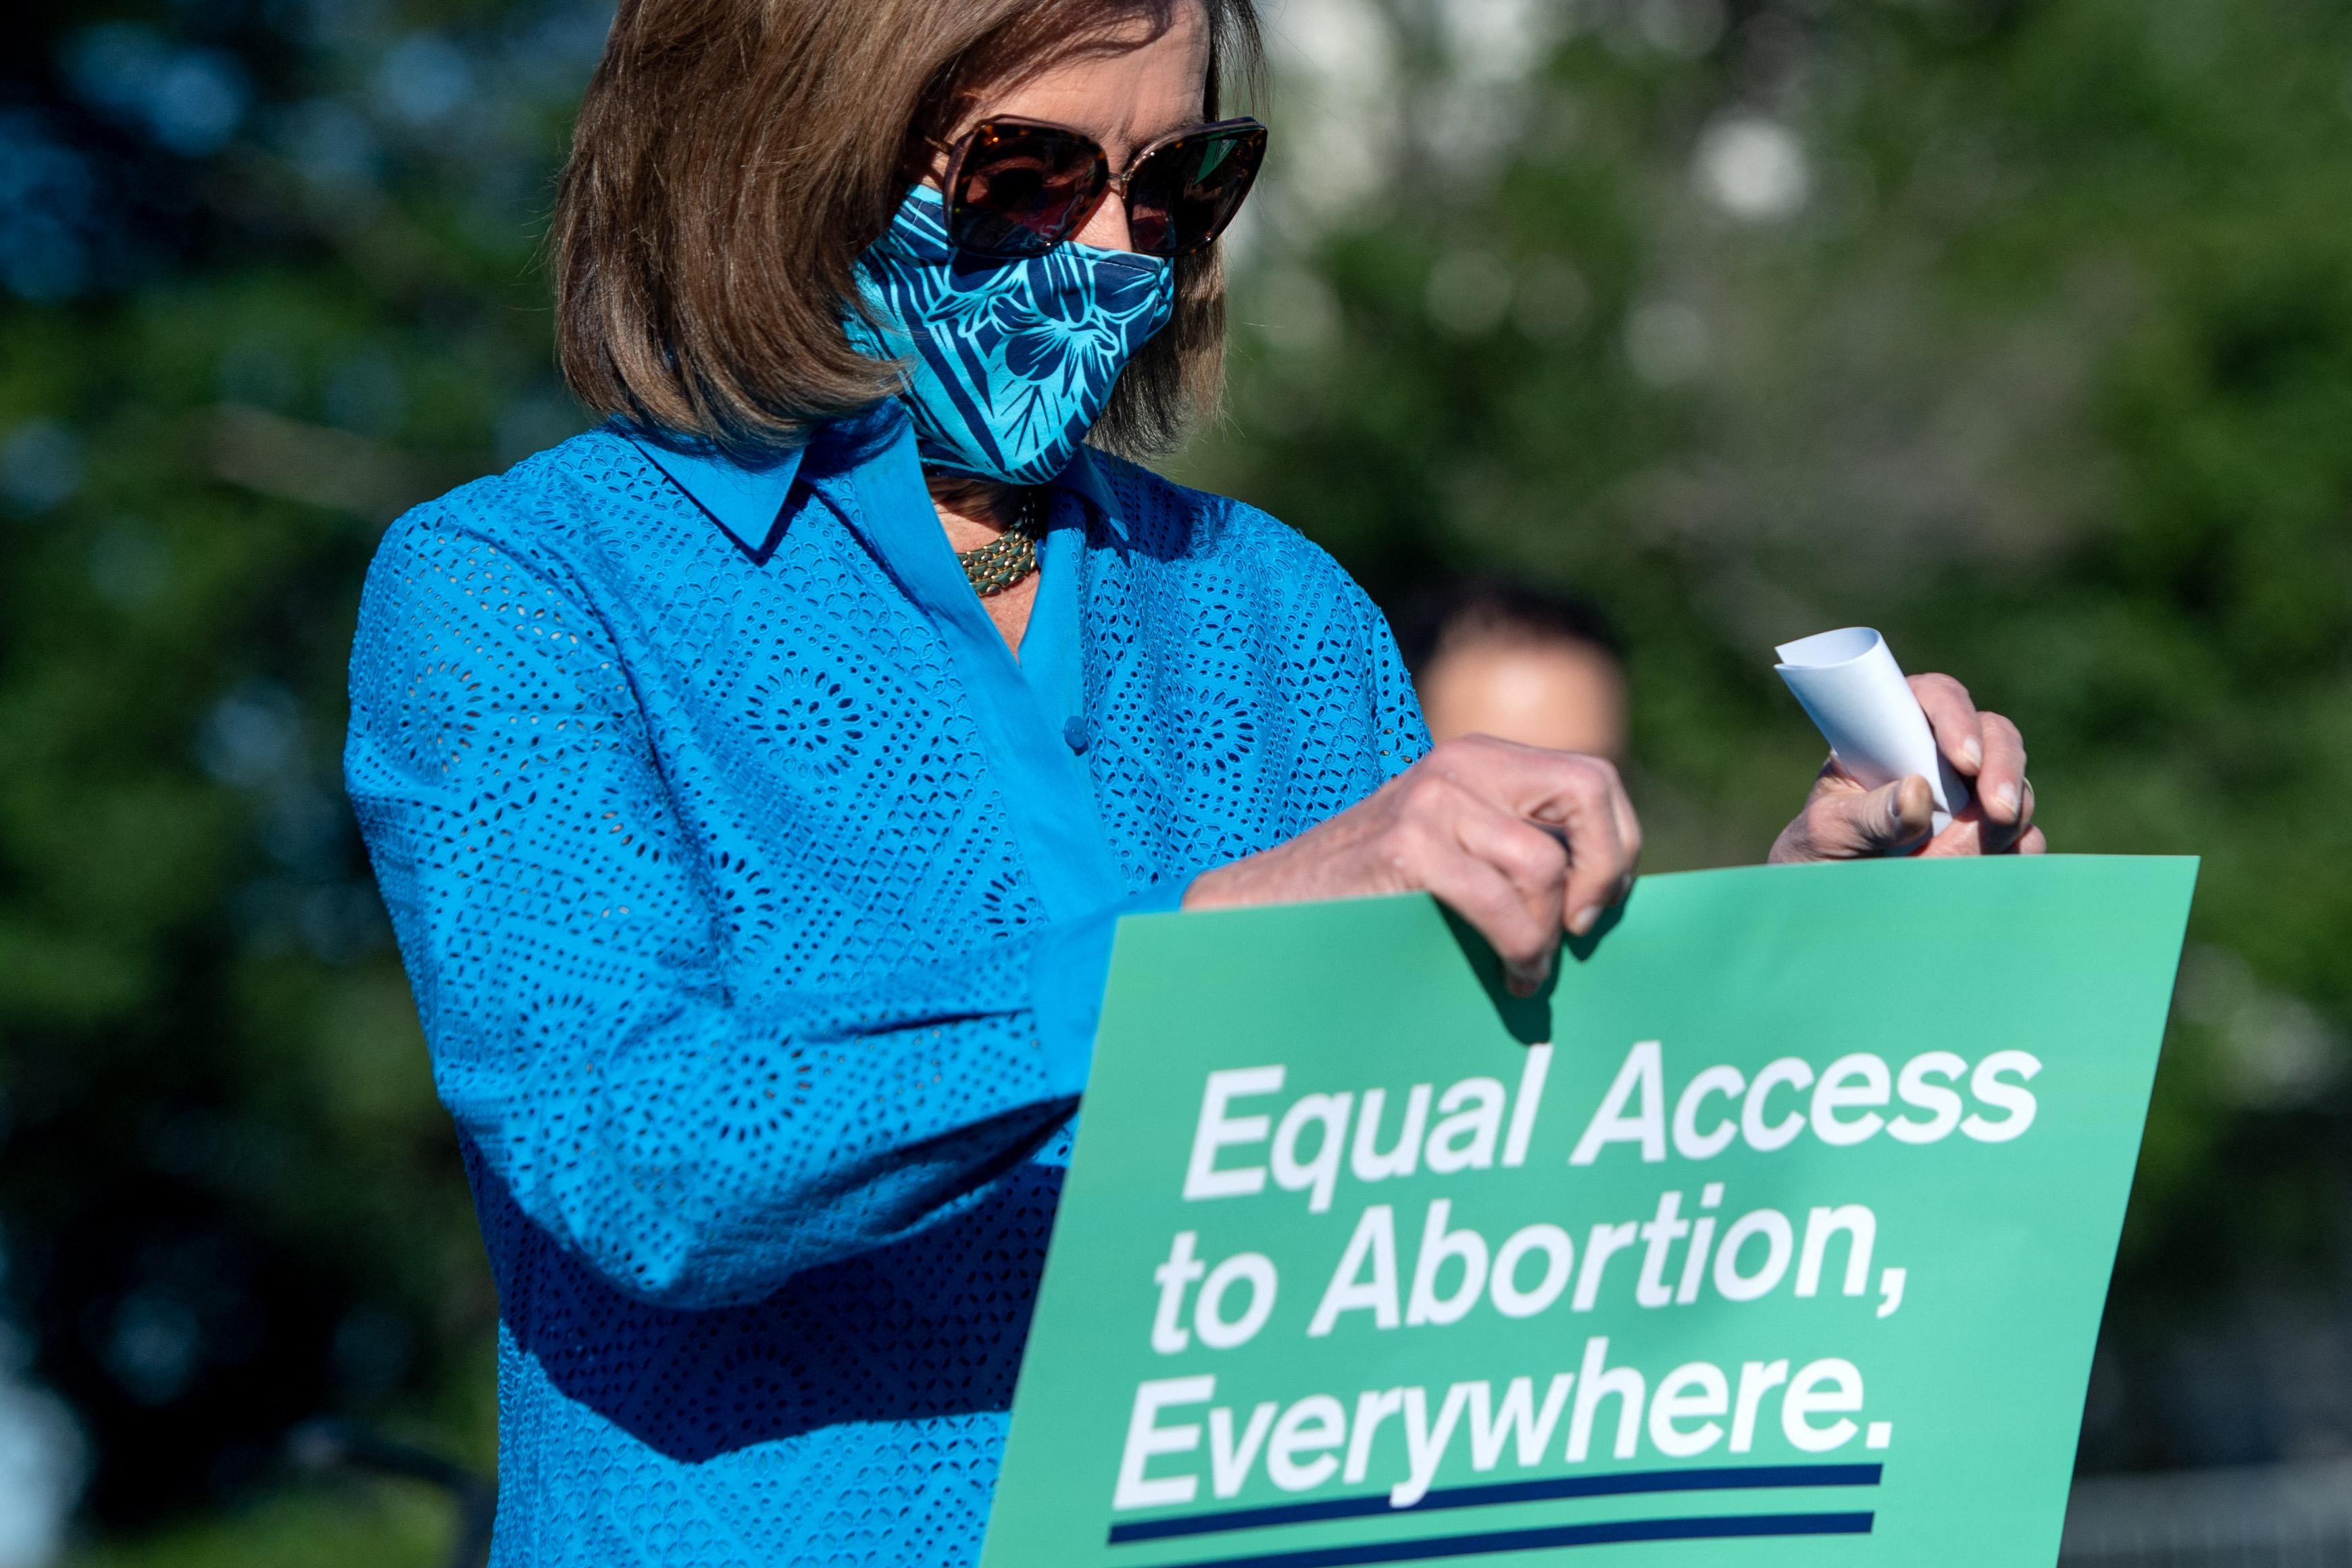 Pelosi stares at a sign that reads "Equal Access To Abortion, Everywhere."